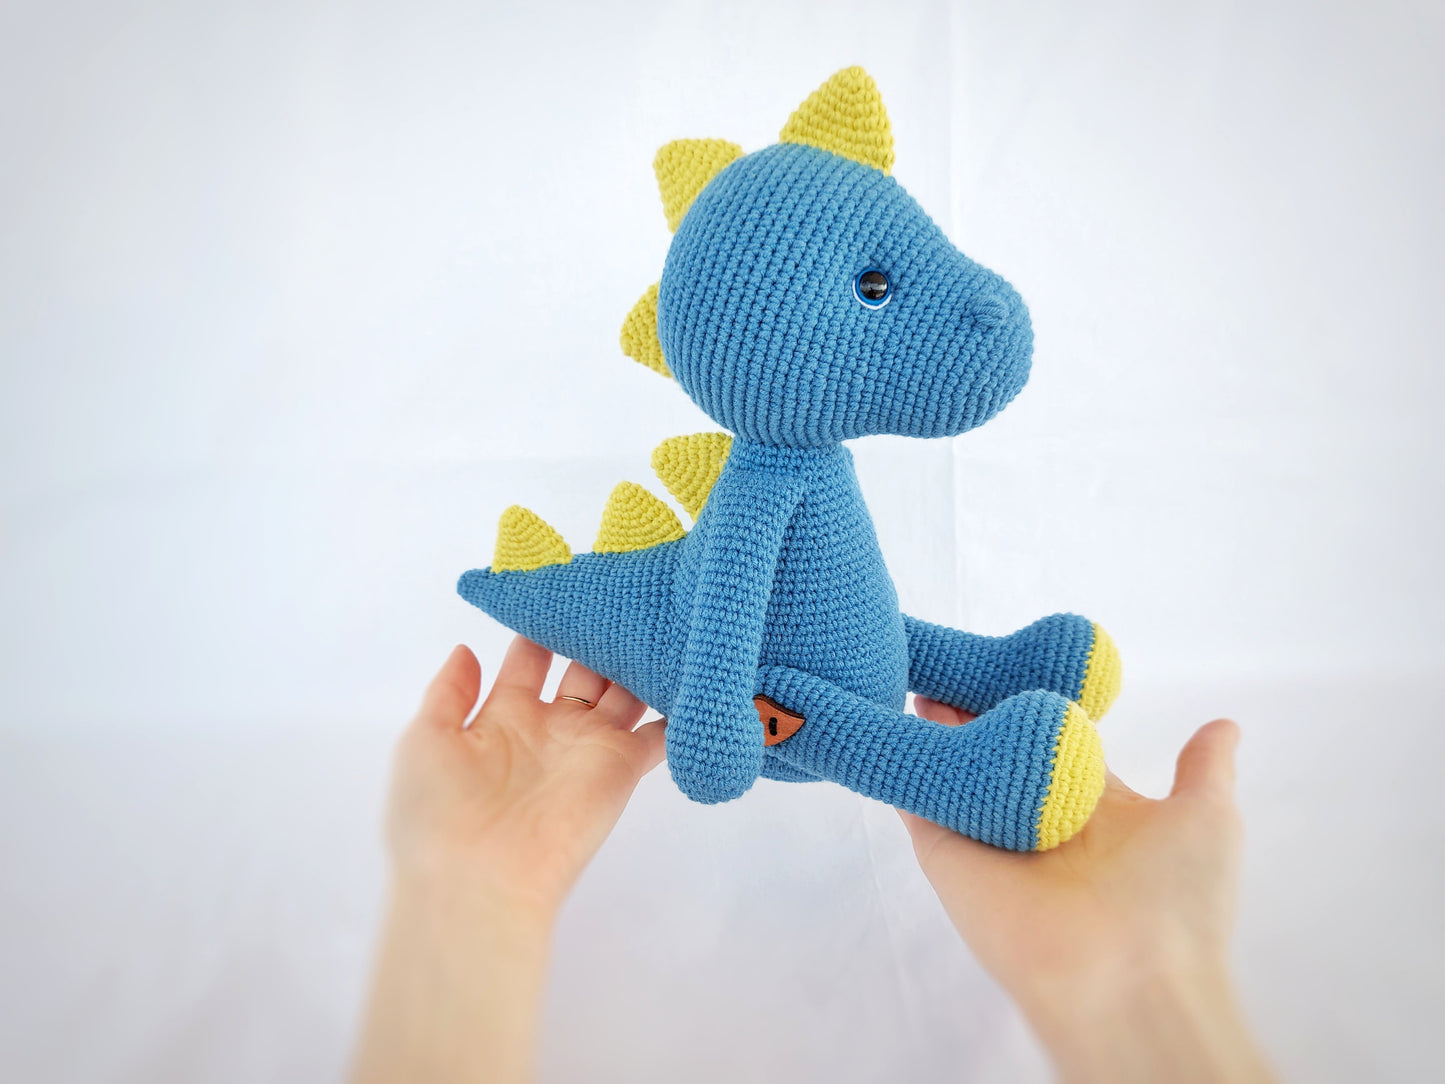 Crochet dinosaur pattern in English, Babies Collection - Amigurumi Toys pattern, Instant PDF Download